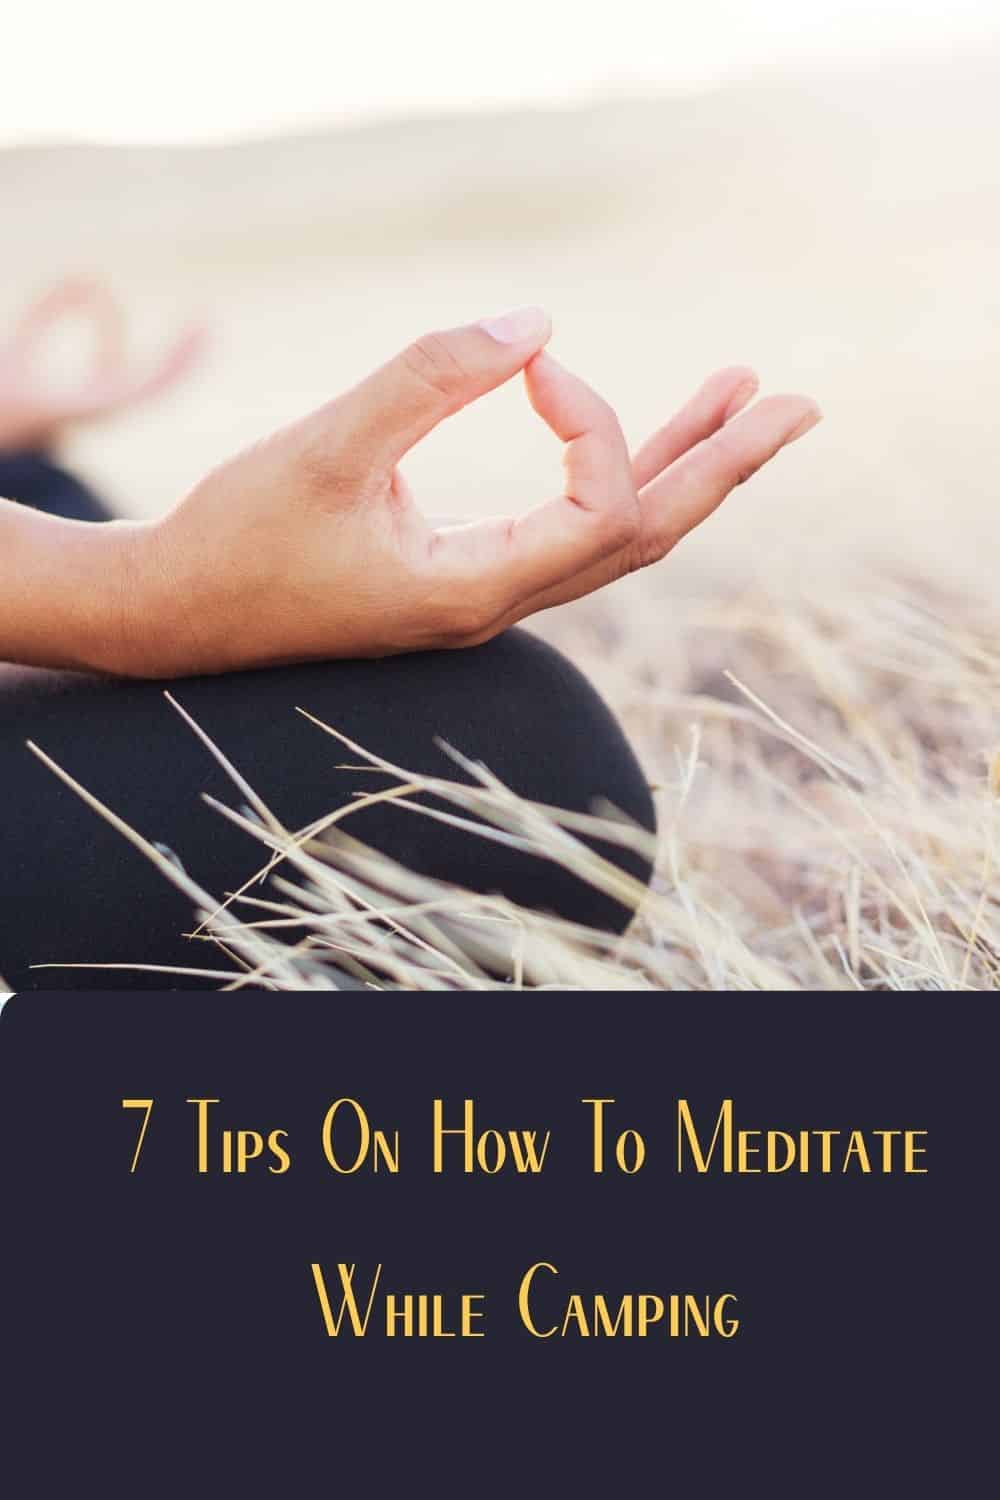 7 Tips On How To Meditate While Camping